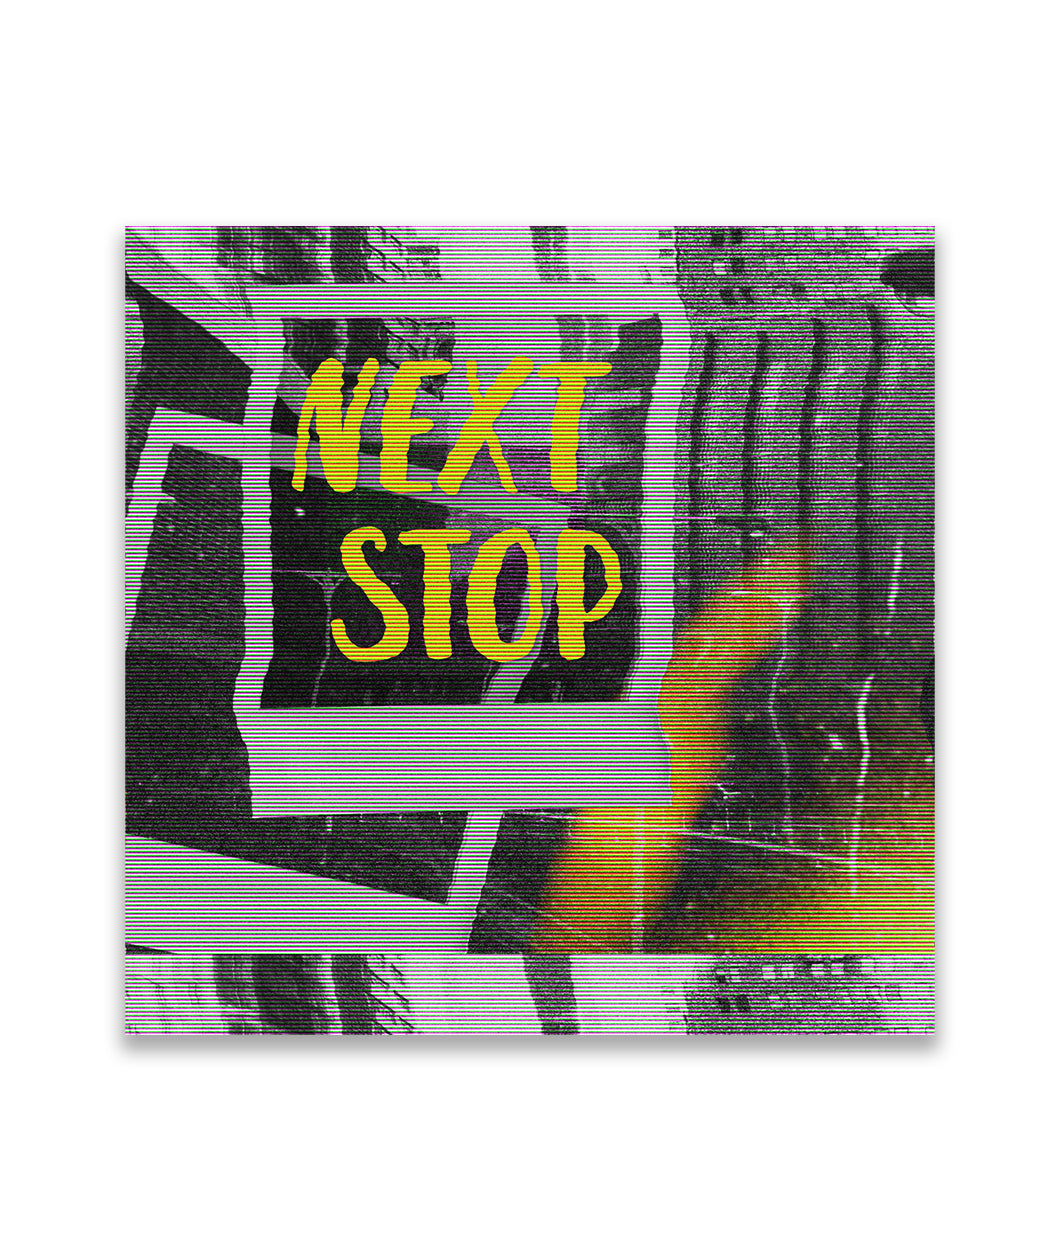 An out of focus square picture of a polaroid with yellow words "Next Stop". 